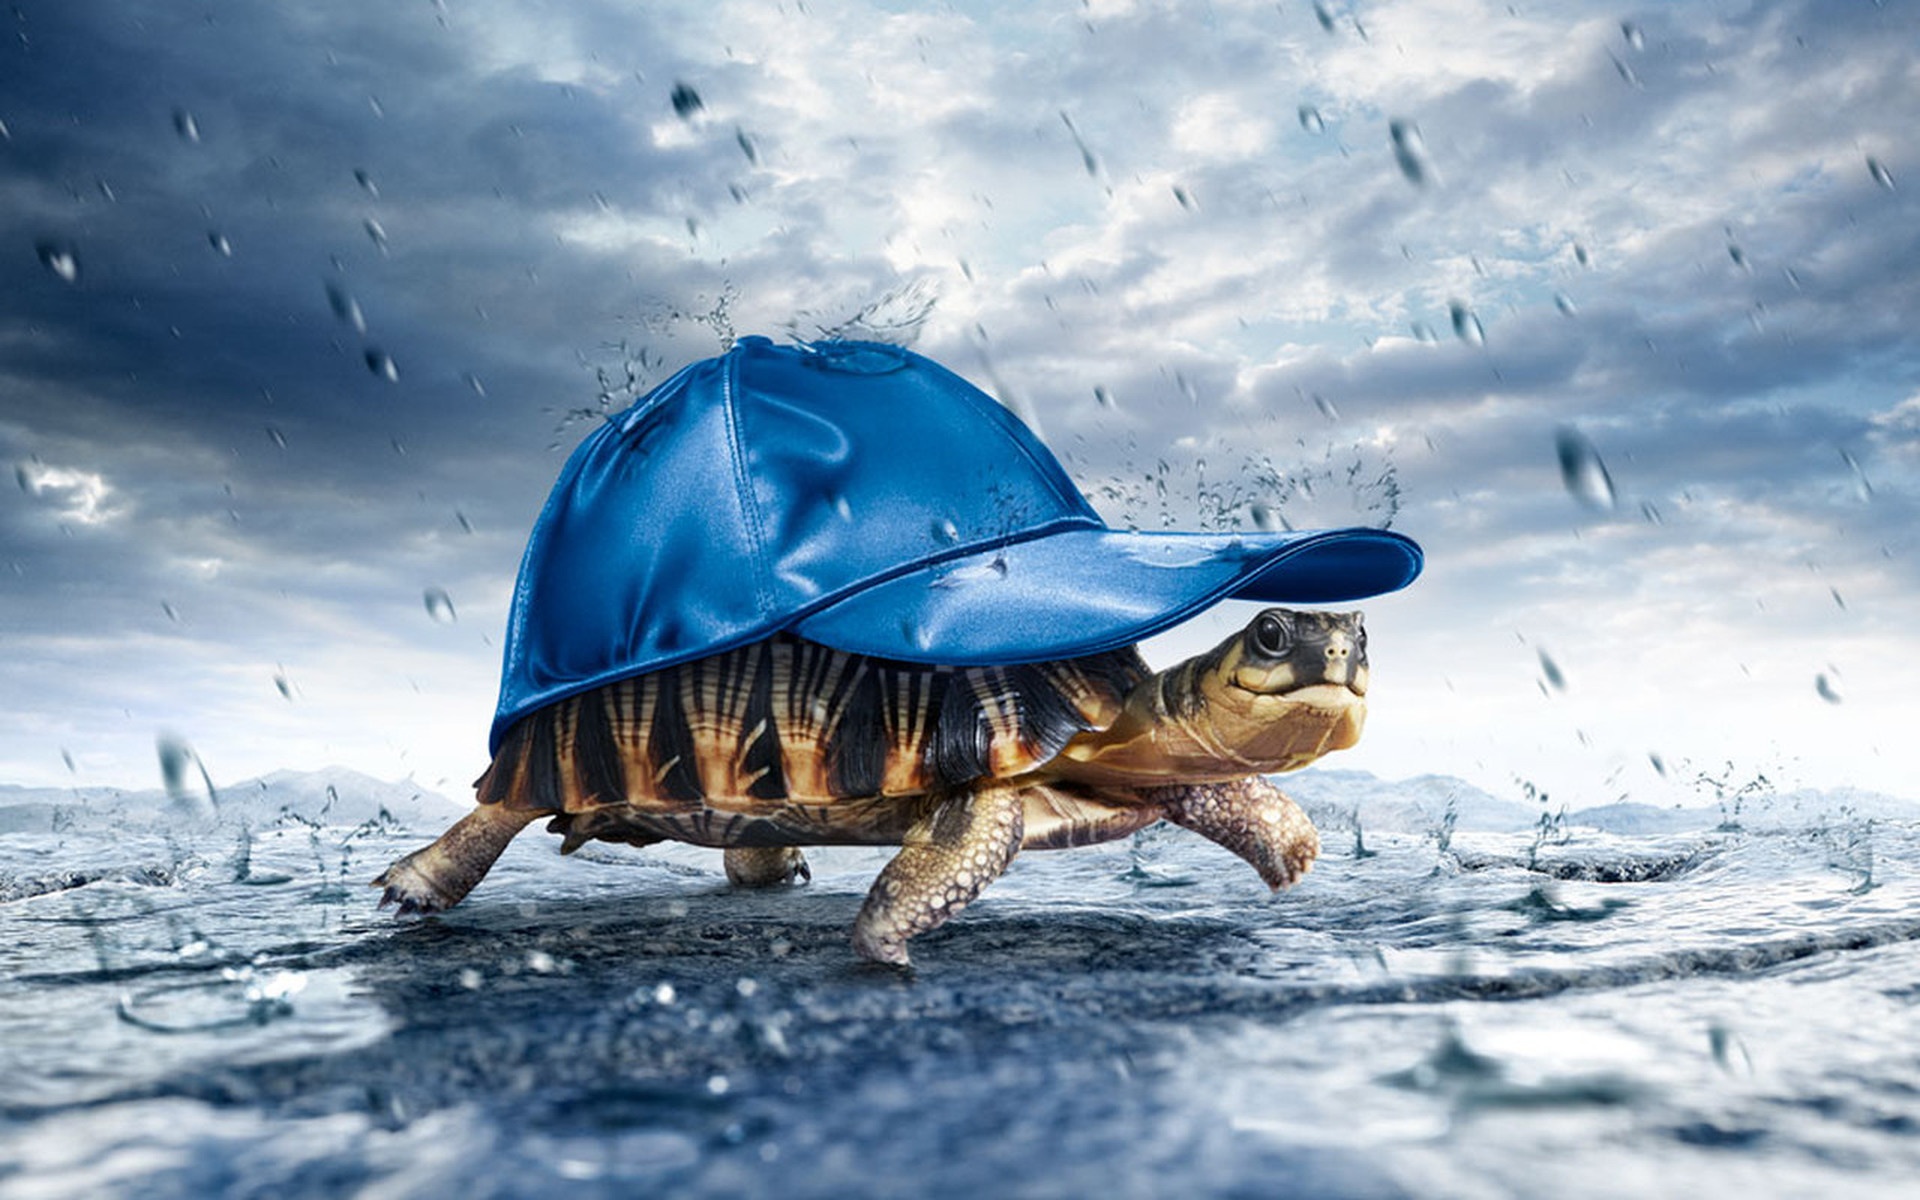 Creative HD wallpaper of a turtle wearing a blue cap walking under the rain with water droplets splashing around, suitable for desktop background.